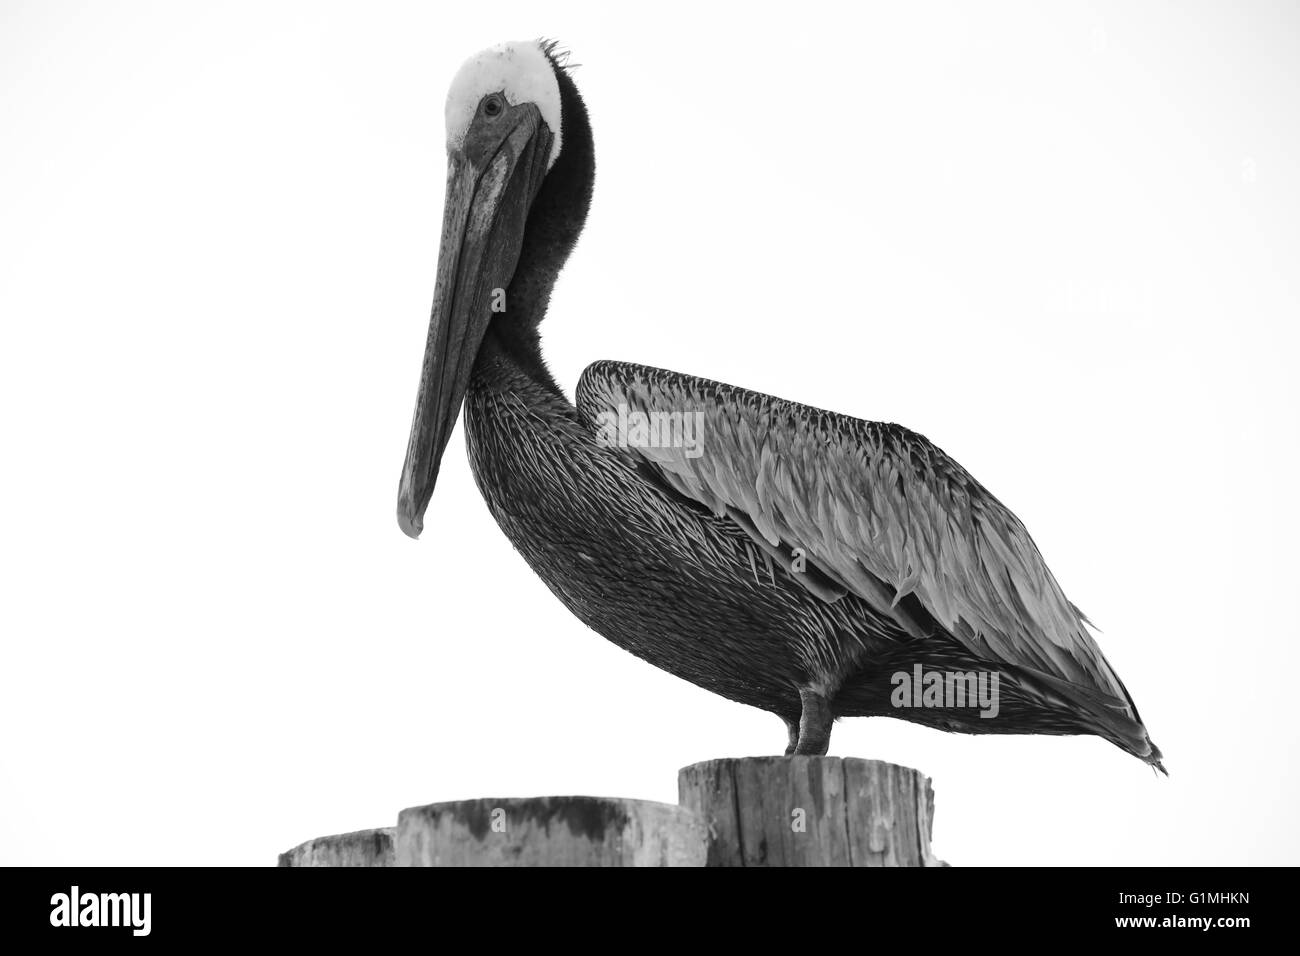 This is s photo of a Florida pelican taken in black and white. Stock Photo